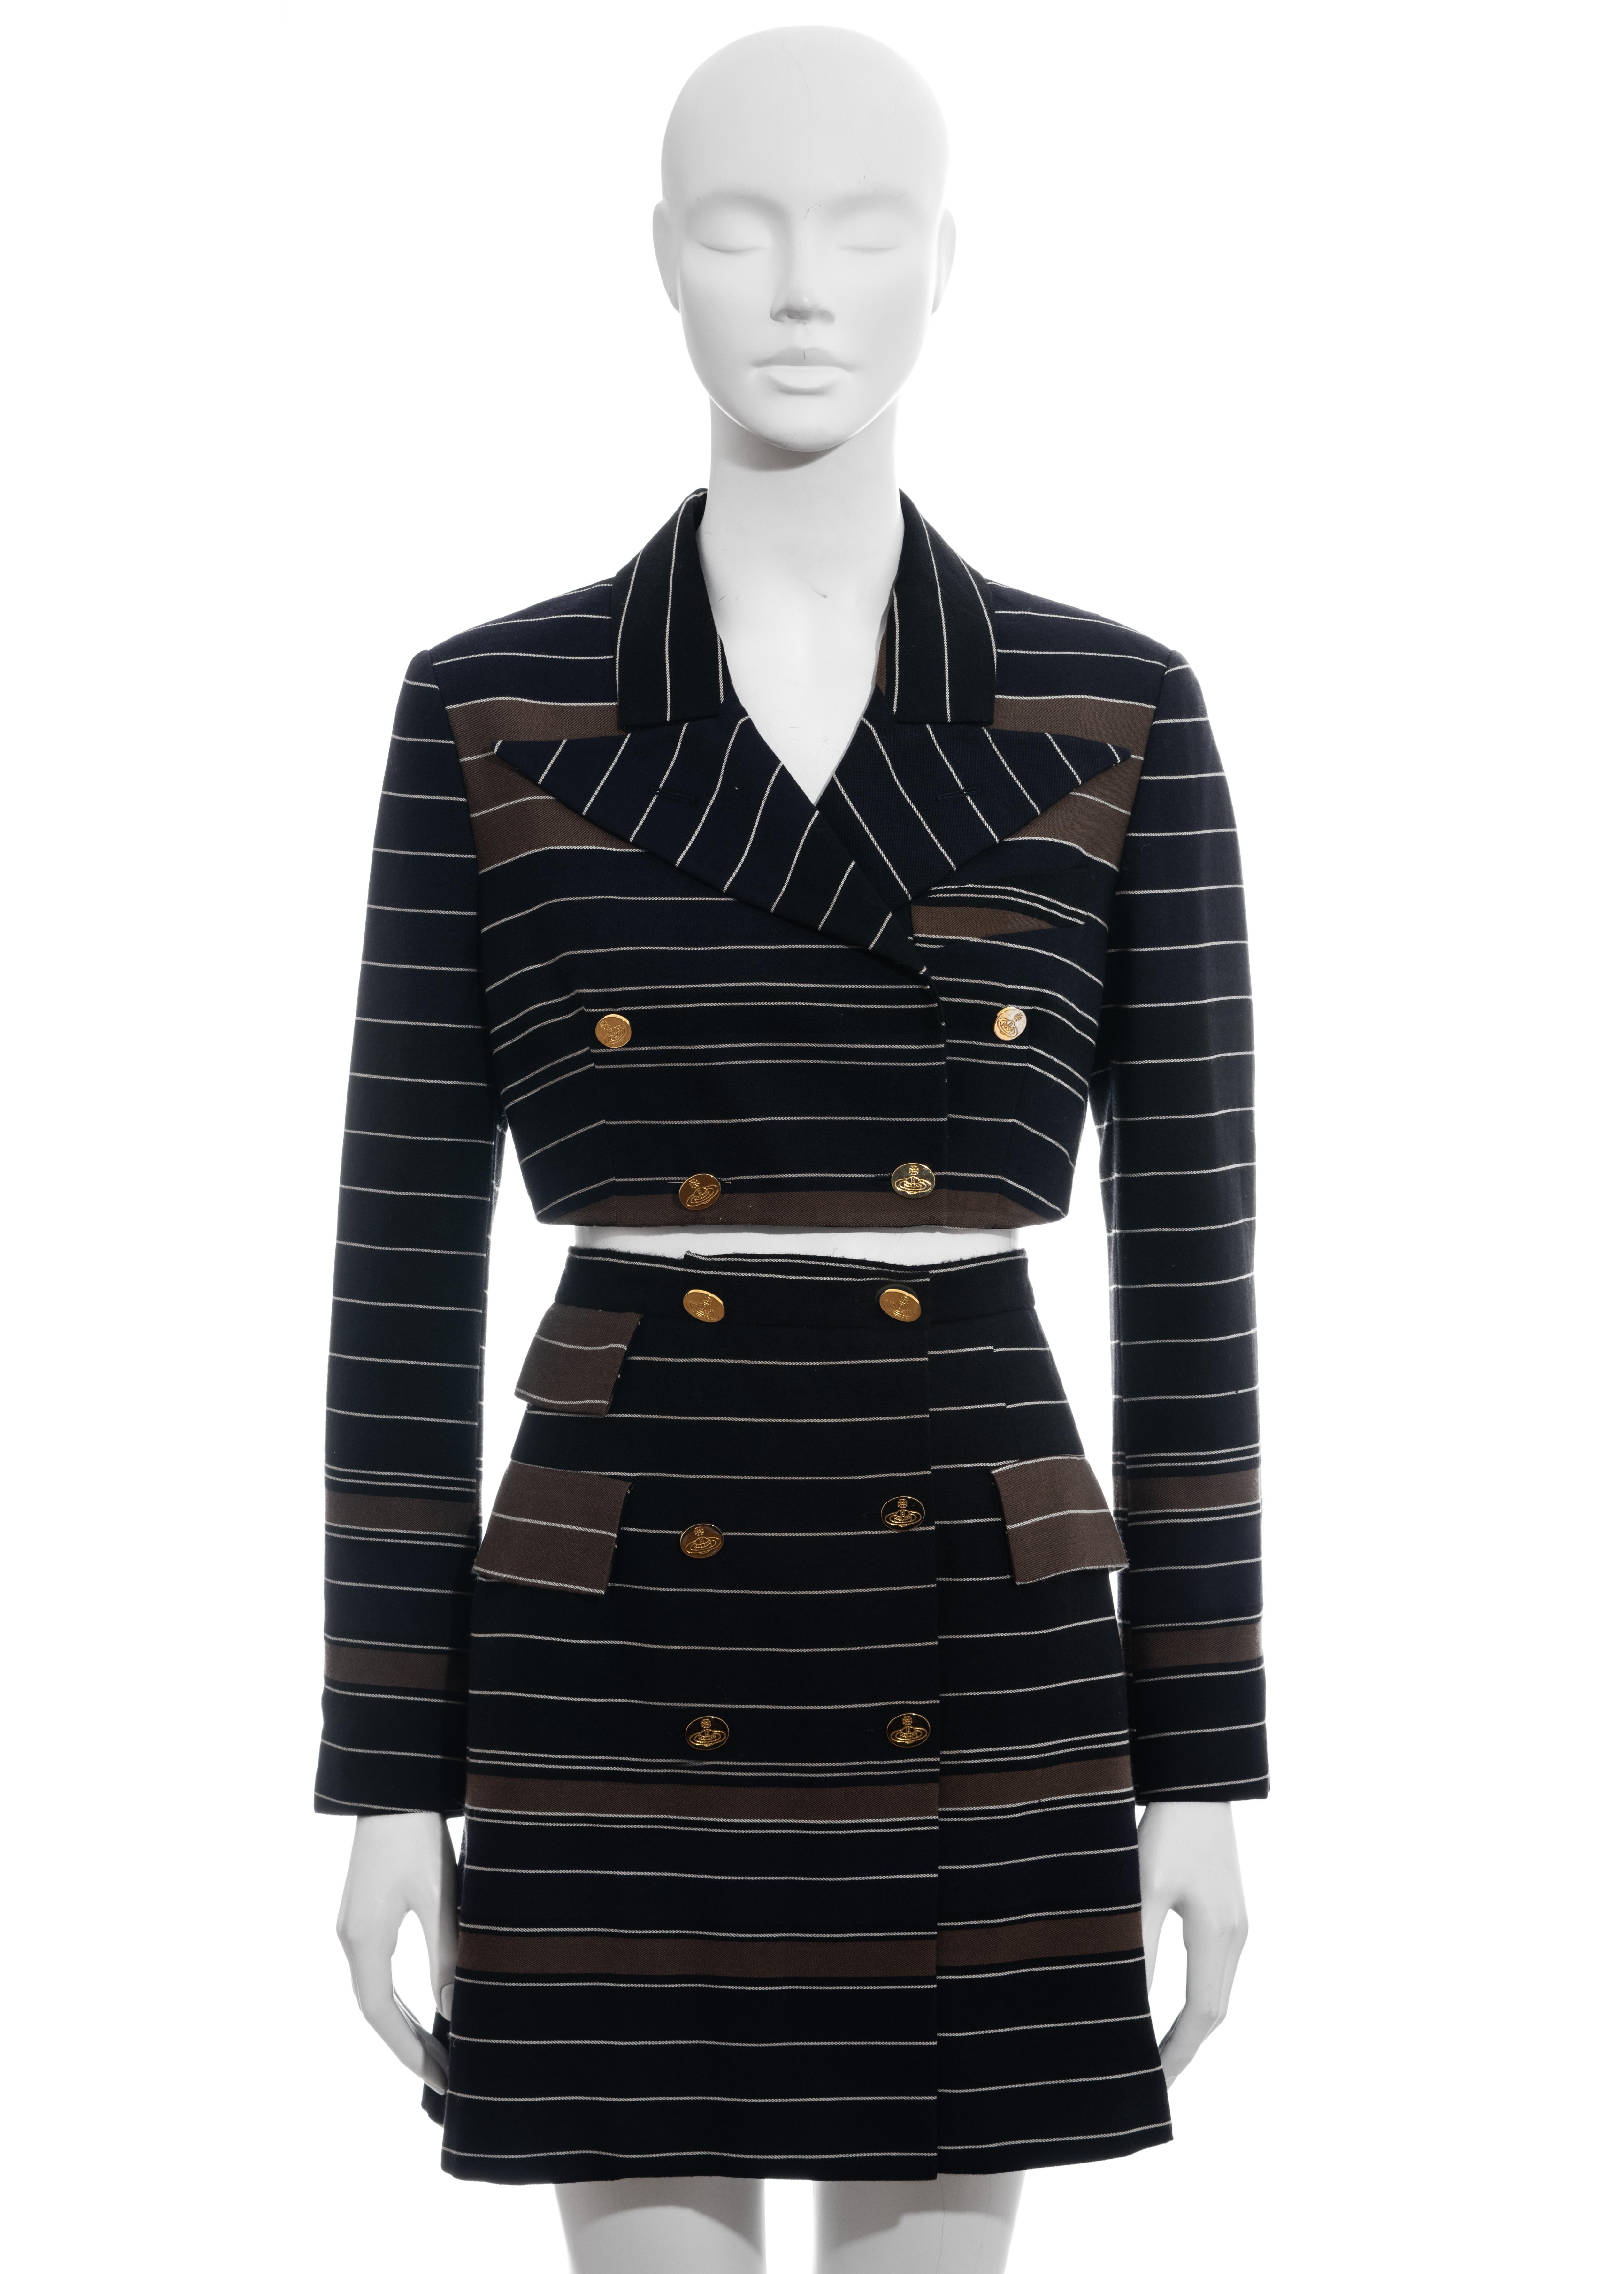 ▪ Vivienne Westwood skirt suit
▪ 69% Wool, 31% Cotton
▪ Black, Navy, Brown and White stripes 
▪ Doubled breasted cropped blazer jacket 
▪ High waist mini wrap skirt with built-in corset
▪ Gold orb etched buttons 
▪ IT 42 - FR 38 - UK 10 - US 6
▪